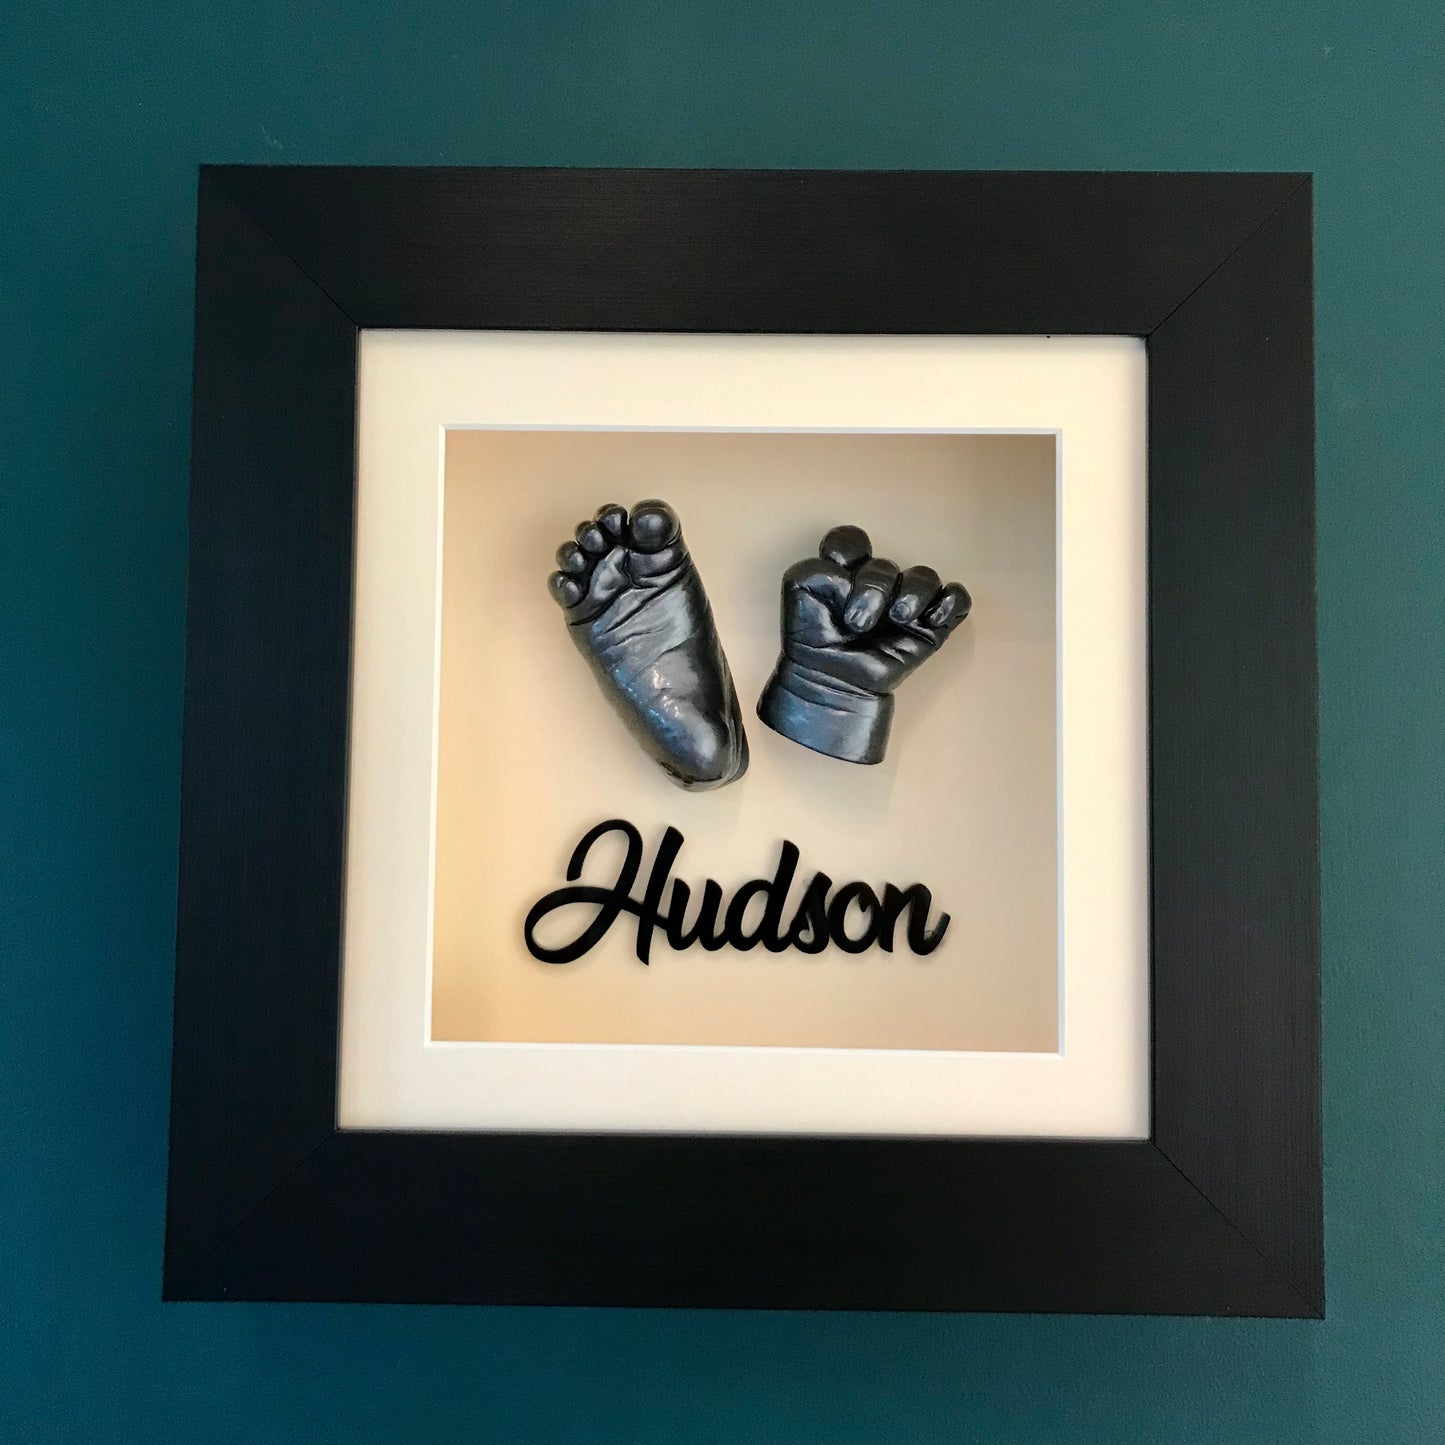 3D Framed Hand & Foot Casts & Acrylic Name